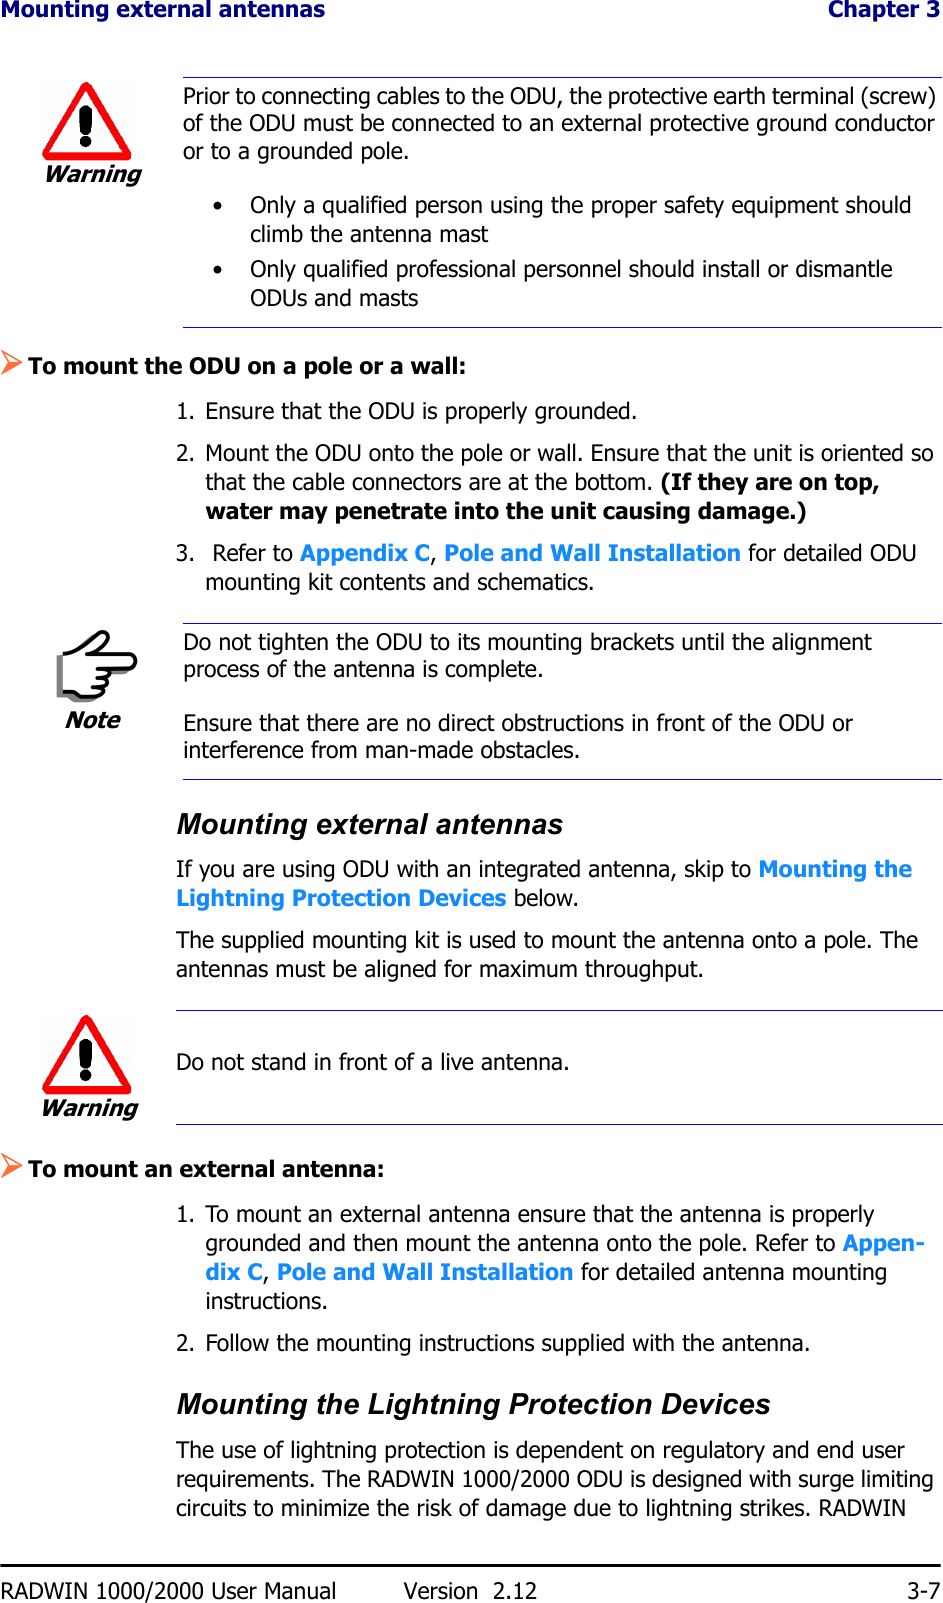 Mounting external antennas  Chapter 3RADWIN 1000/2000 User Manual Version  2.12 3-7¾To mount the ODU on a pole or a wall:1. Ensure that the ODU is properly grounded.2. Mount the ODU onto the pole or wall. Ensure that the unit is oriented so that the cable connectors are at the bottom. (If they are on top, water may penetrate into the unit causing damage.)3.  Refer to Appendix C, Pole and Wall Installation for detailed ODU mounting kit contents and schematics.Mounting external antennasIf you are using ODU with an integrated antenna, skip to Mounting the Lightning Protection Devices below.The supplied mounting kit is used to mount the antenna onto a pole. The antennas must be aligned for maximum throughput.¾To mount an external antenna:1. To mount an external antenna ensure that the antenna is properly grounded and then mount the antenna onto the pole. Refer to Appen-dix C, Pole and Wall Installation for detailed antenna mounting instructions.2. Follow the mounting instructions supplied with the antenna.Mounting the Lightning Protection DevicesThe use of lightning protection is dependent on regulatory and end user requirements. The RADWIN 1000/2000 ODU is designed with surge limiting circuits to minimize the risk of damage due to lightning strikes. RADWIN WarningPrior to connecting cables to the ODU, the protective earth terminal (screw) of the ODU must be connected to an external protective ground conductor or to a grounded pole. • Only a qualified person using the proper safety equipment should climb the antenna mast• Only qualified professional personnel should install or dismantle ODUs and mastsNoteDo not tighten the ODU to its mounting brackets until the alignment process of the antenna is complete.Ensure that there are no direct obstructions in front of the ODU or interference from man-made obstacles.WarningDo not stand in front of a live antenna.